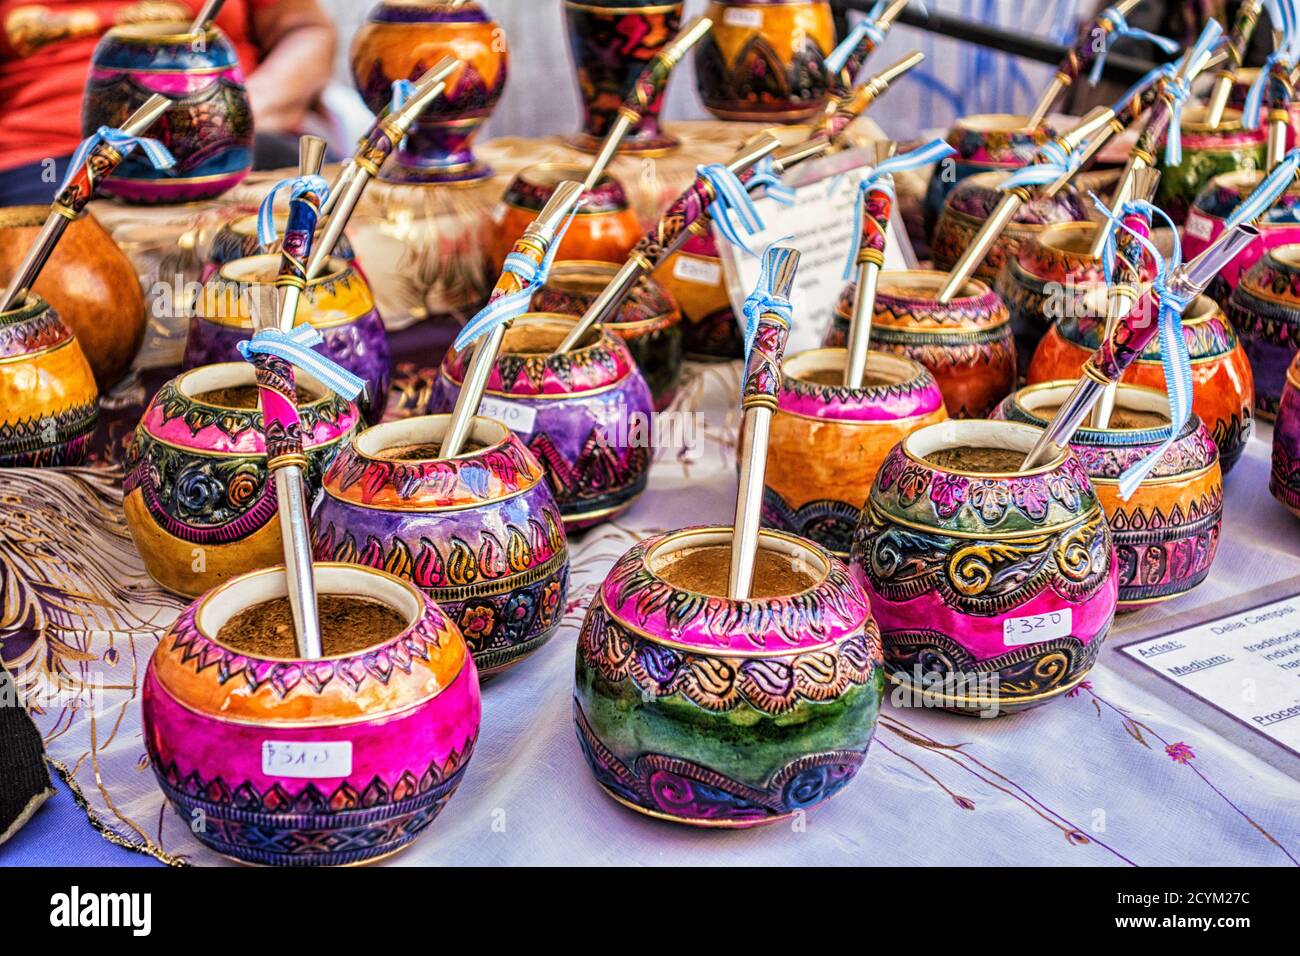 Mate gourd for sale for traditional Argentina tea Stock Photo - Alamy